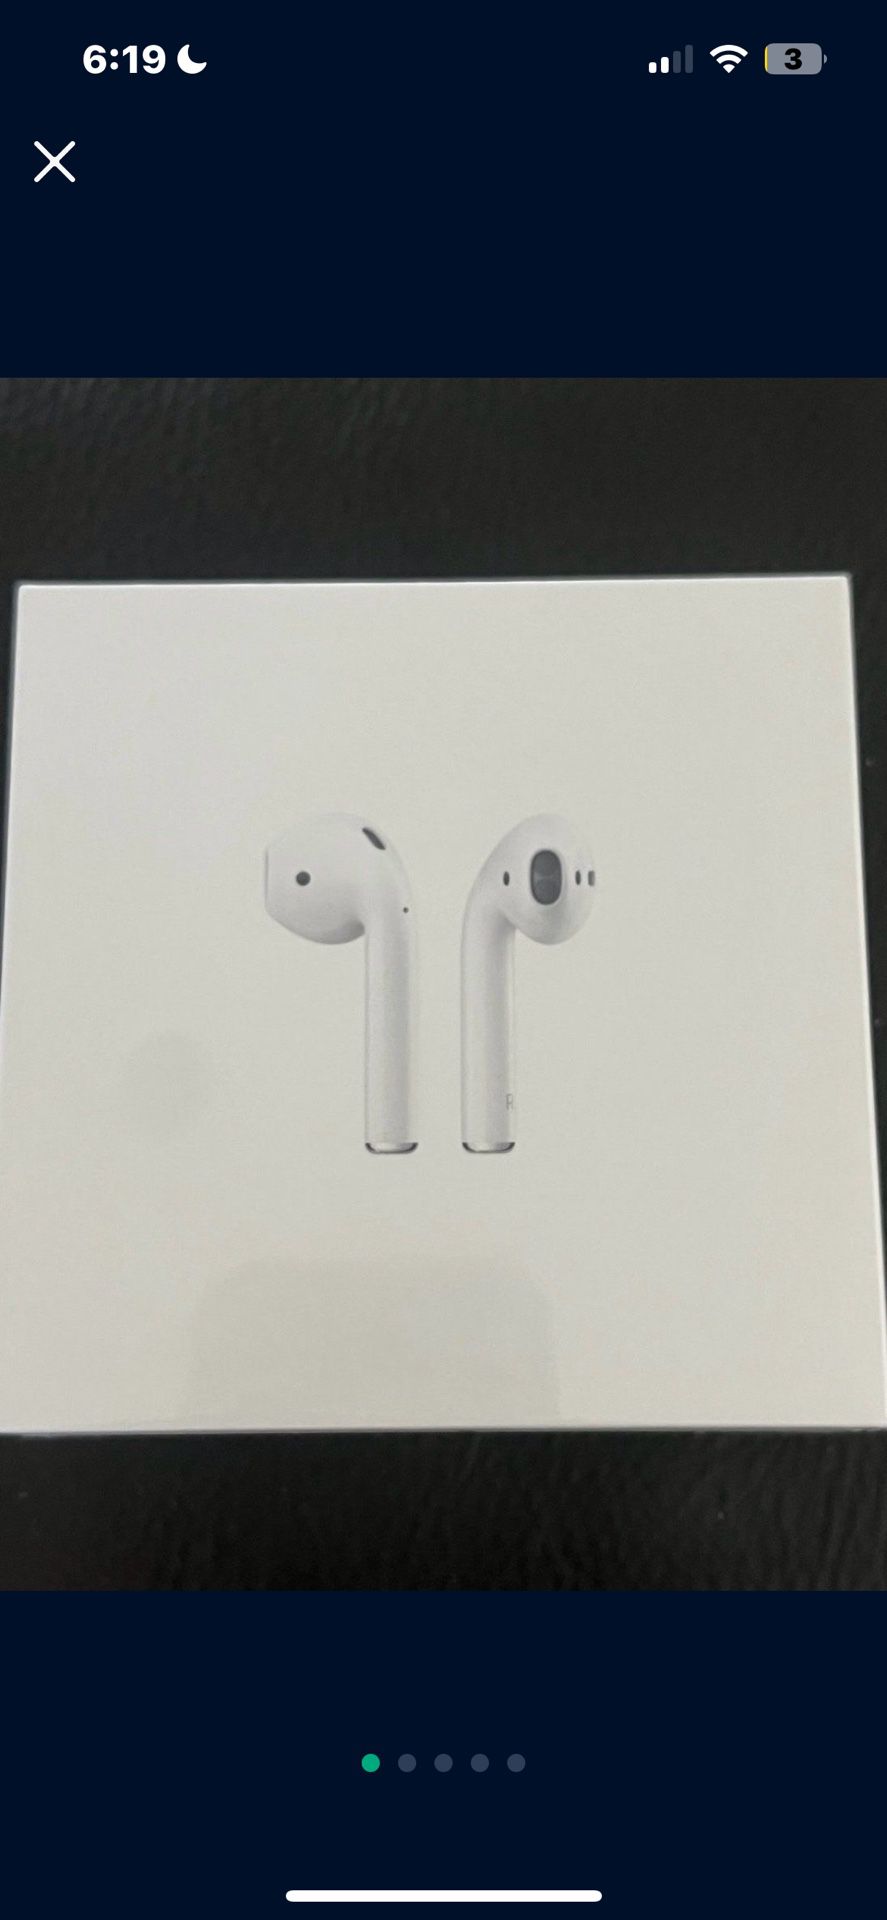 Apple AirPods 2nd Generation with Charging Case in White